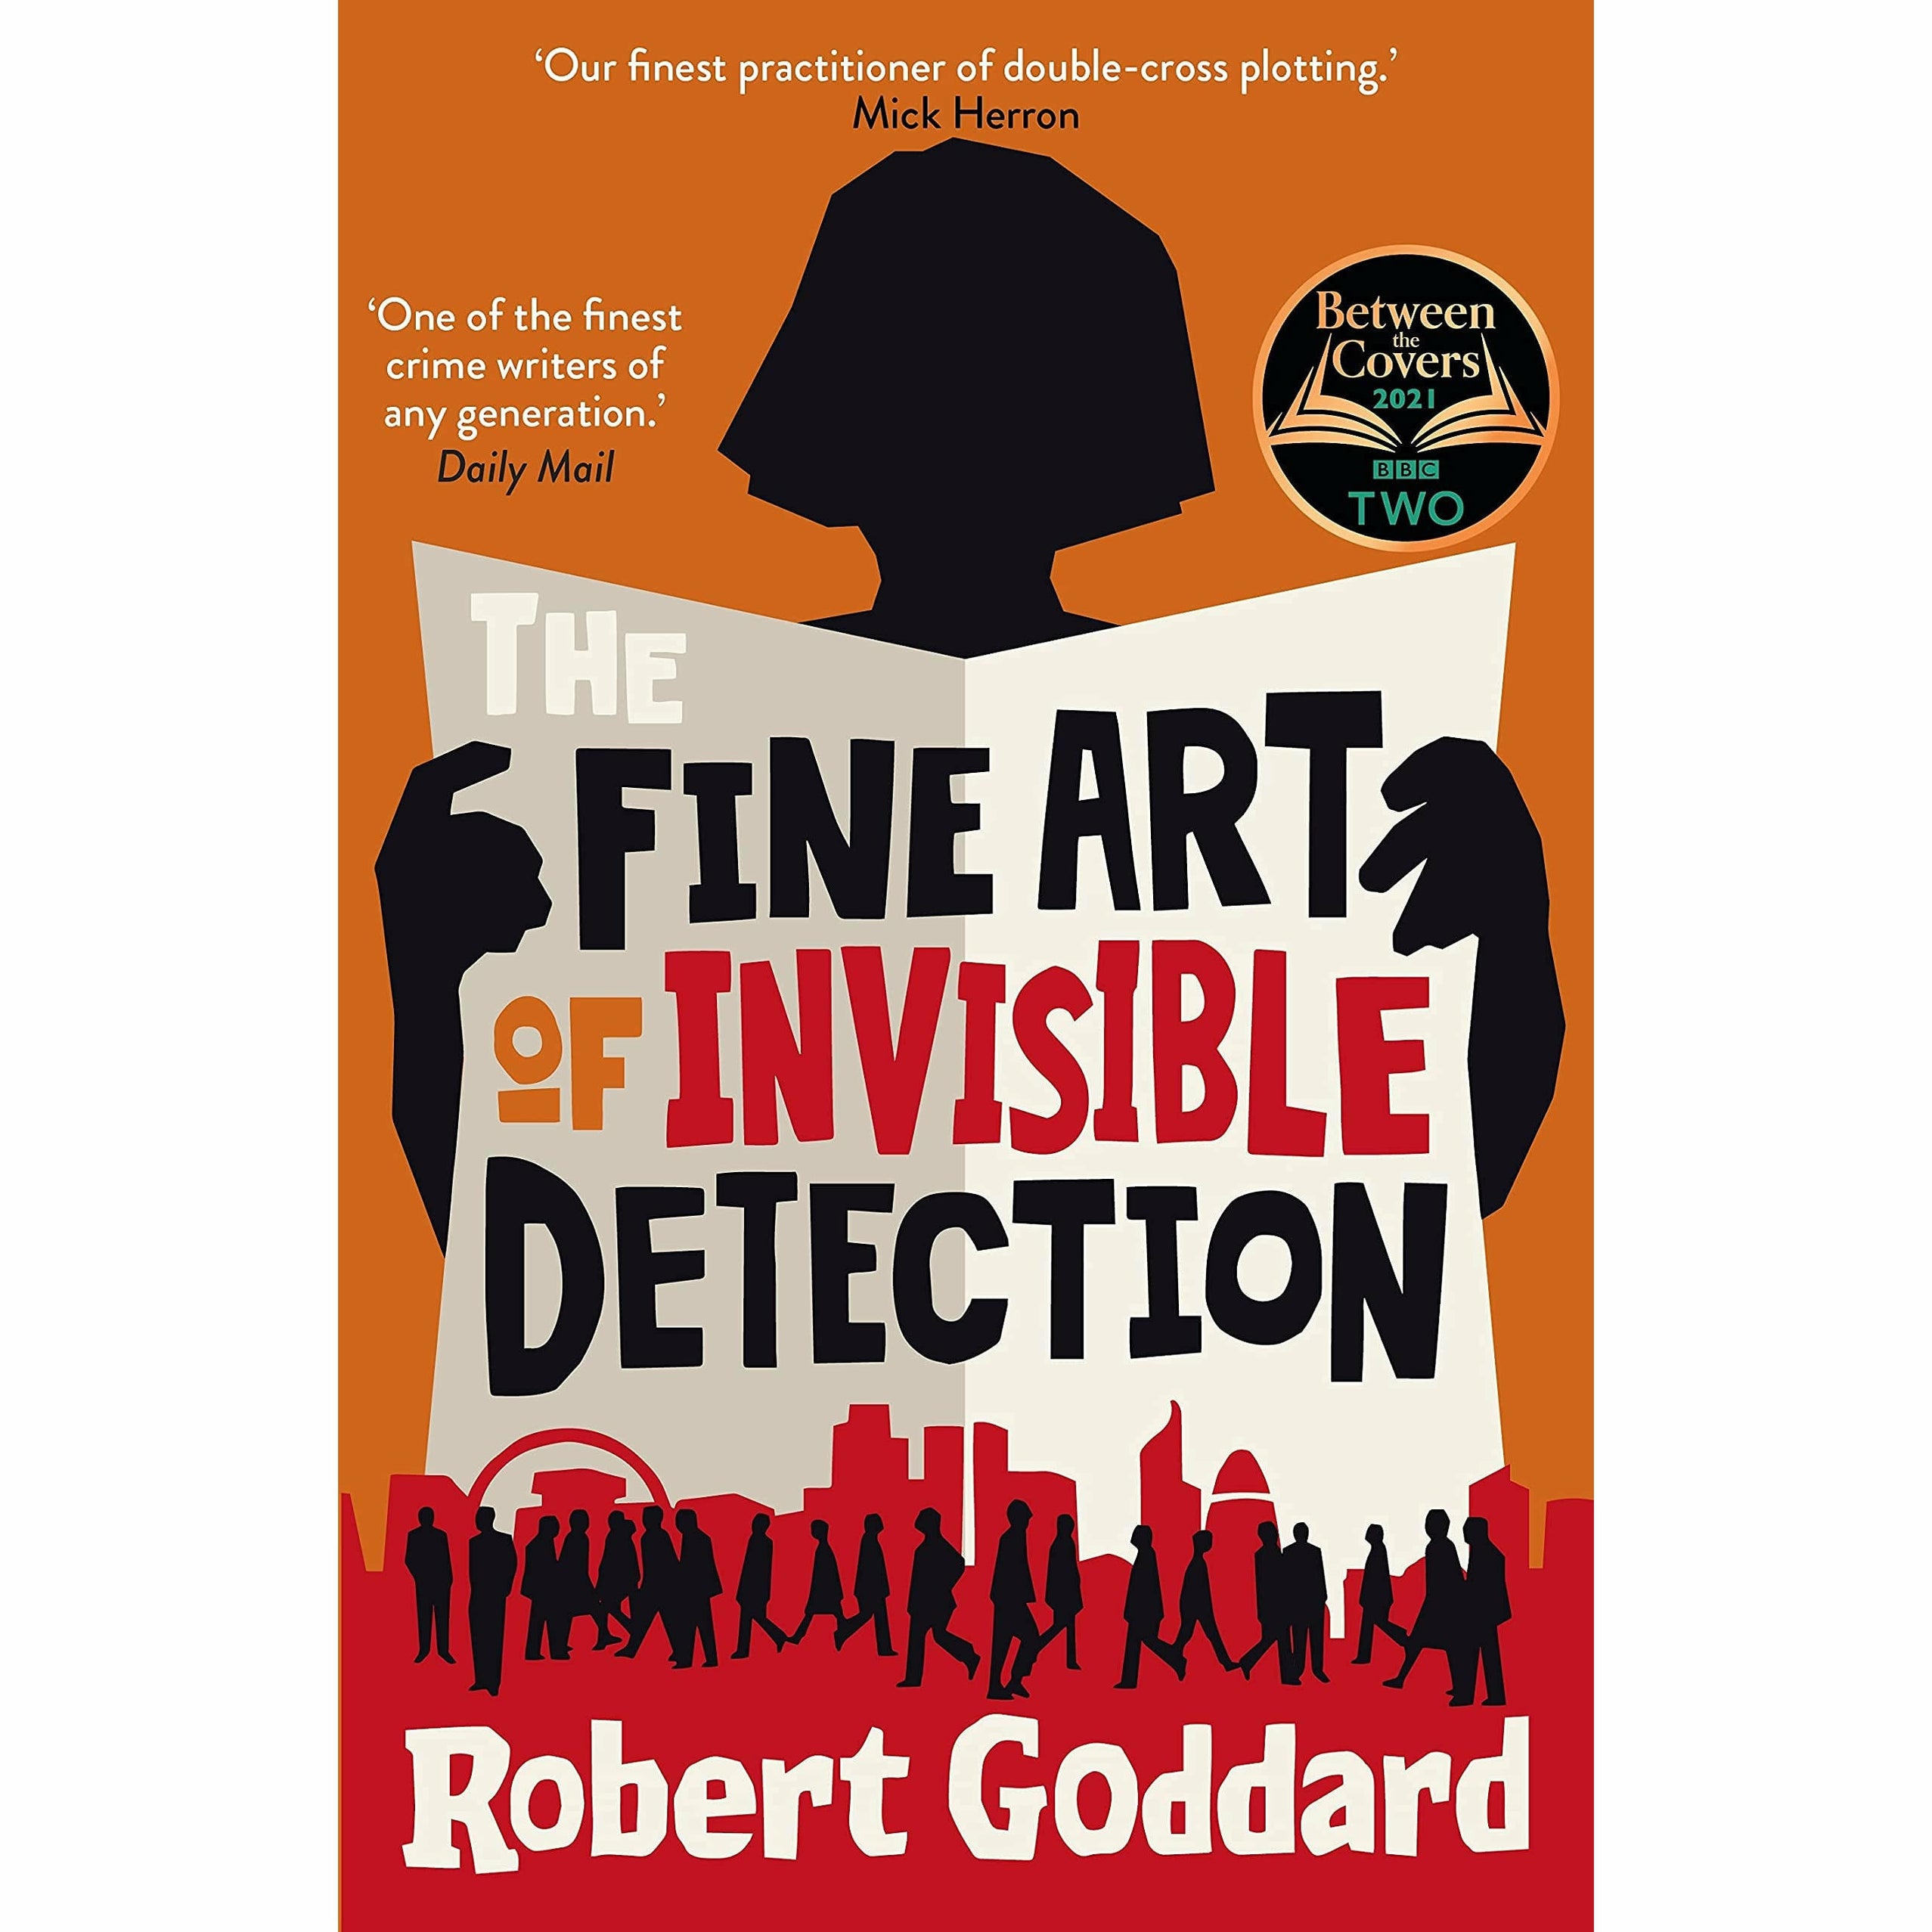 Robert Goddard 3 Books Collection Set (The Fine Art of Invisible